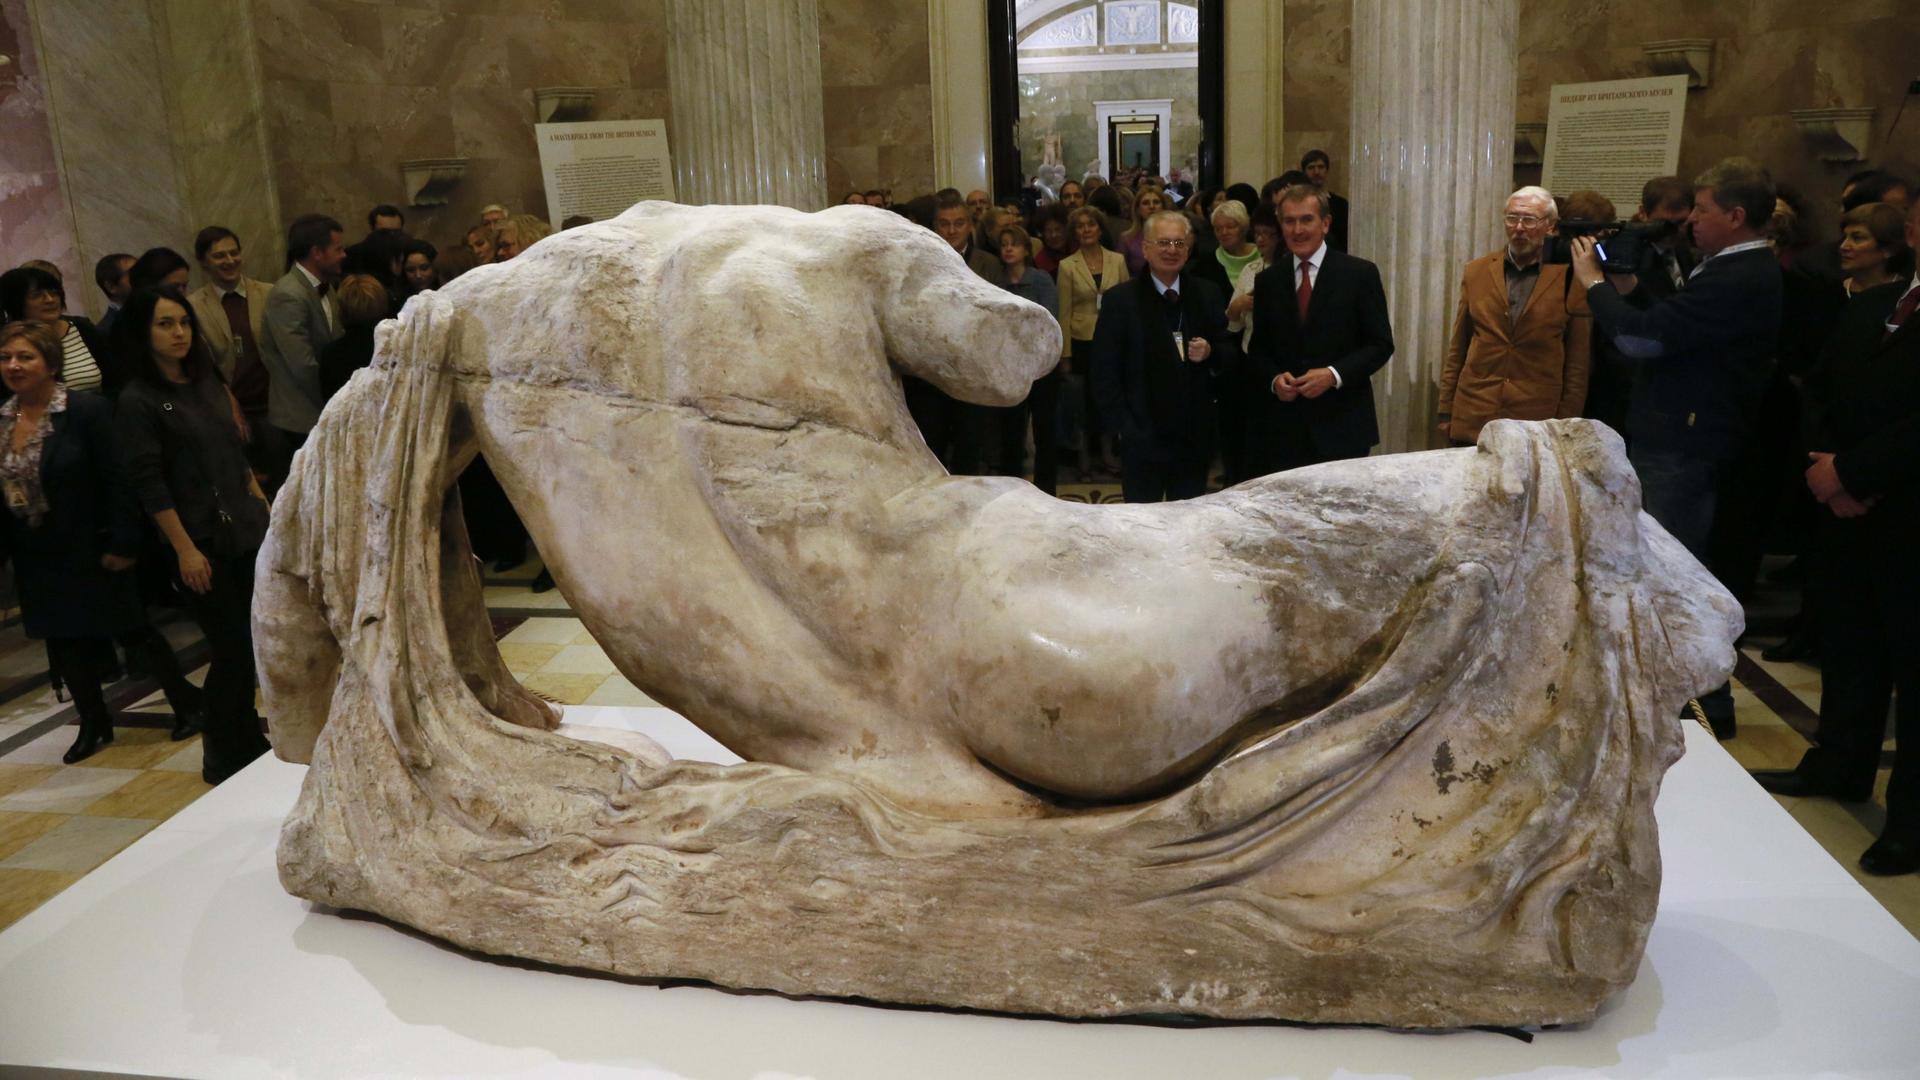 Onlookers attend the opening of the exhibition on Greek art with the marble sculpture of the river god Ilissos, in front, in the Hermitage in St. Petersburg, Russia, Dec. 5, 2014.